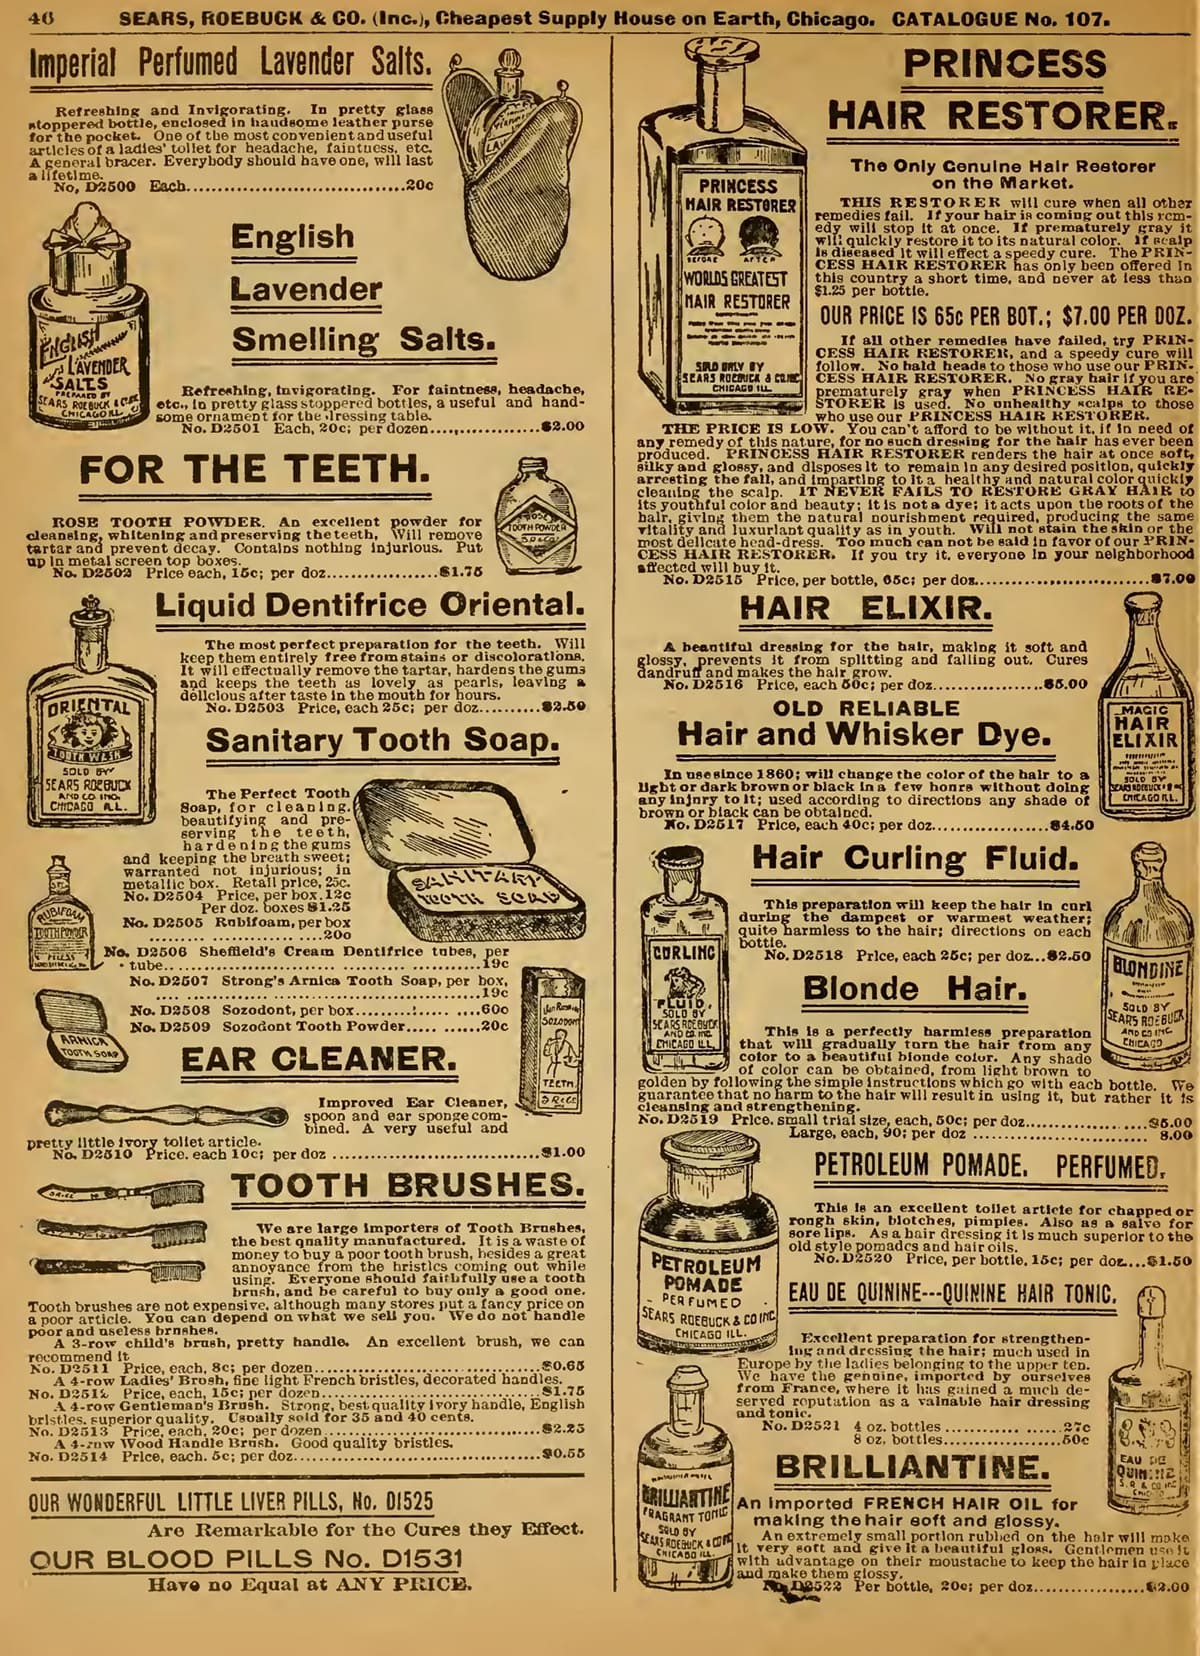 An 1899 catalog page depicting “hair restorer”